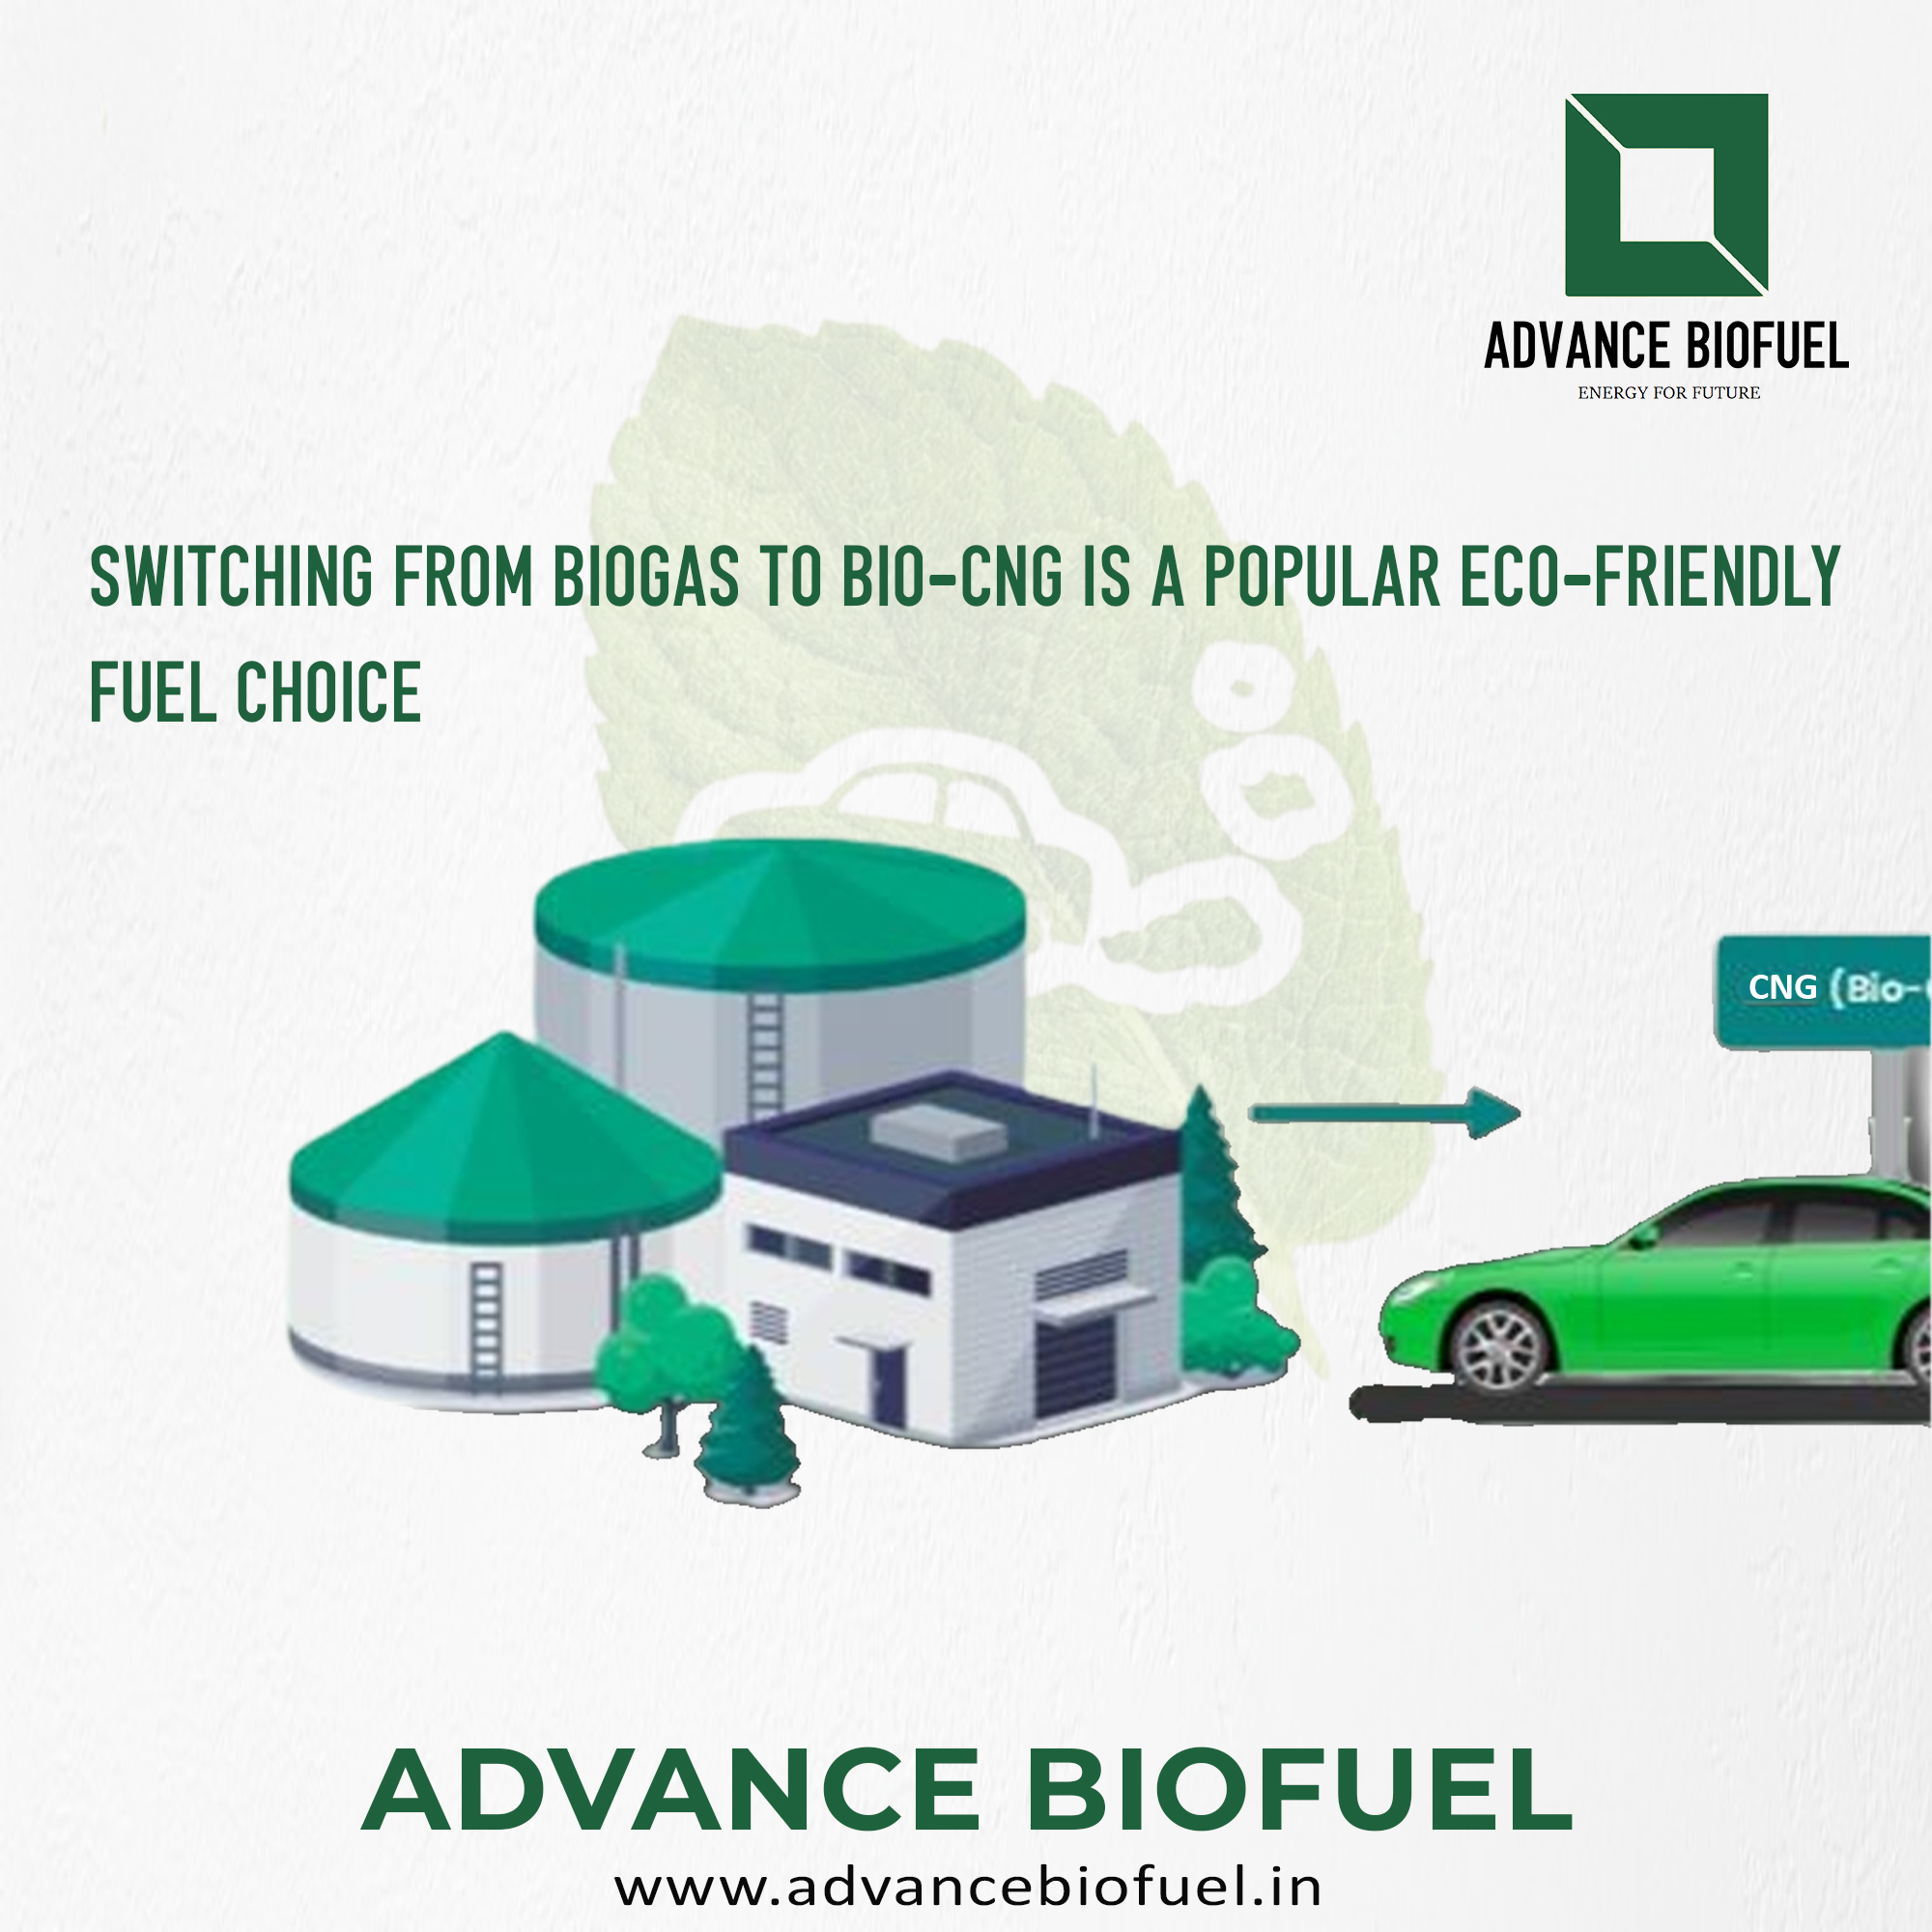 Switching from biogas to bio-CNG is a popular eco-friendly fuel choice